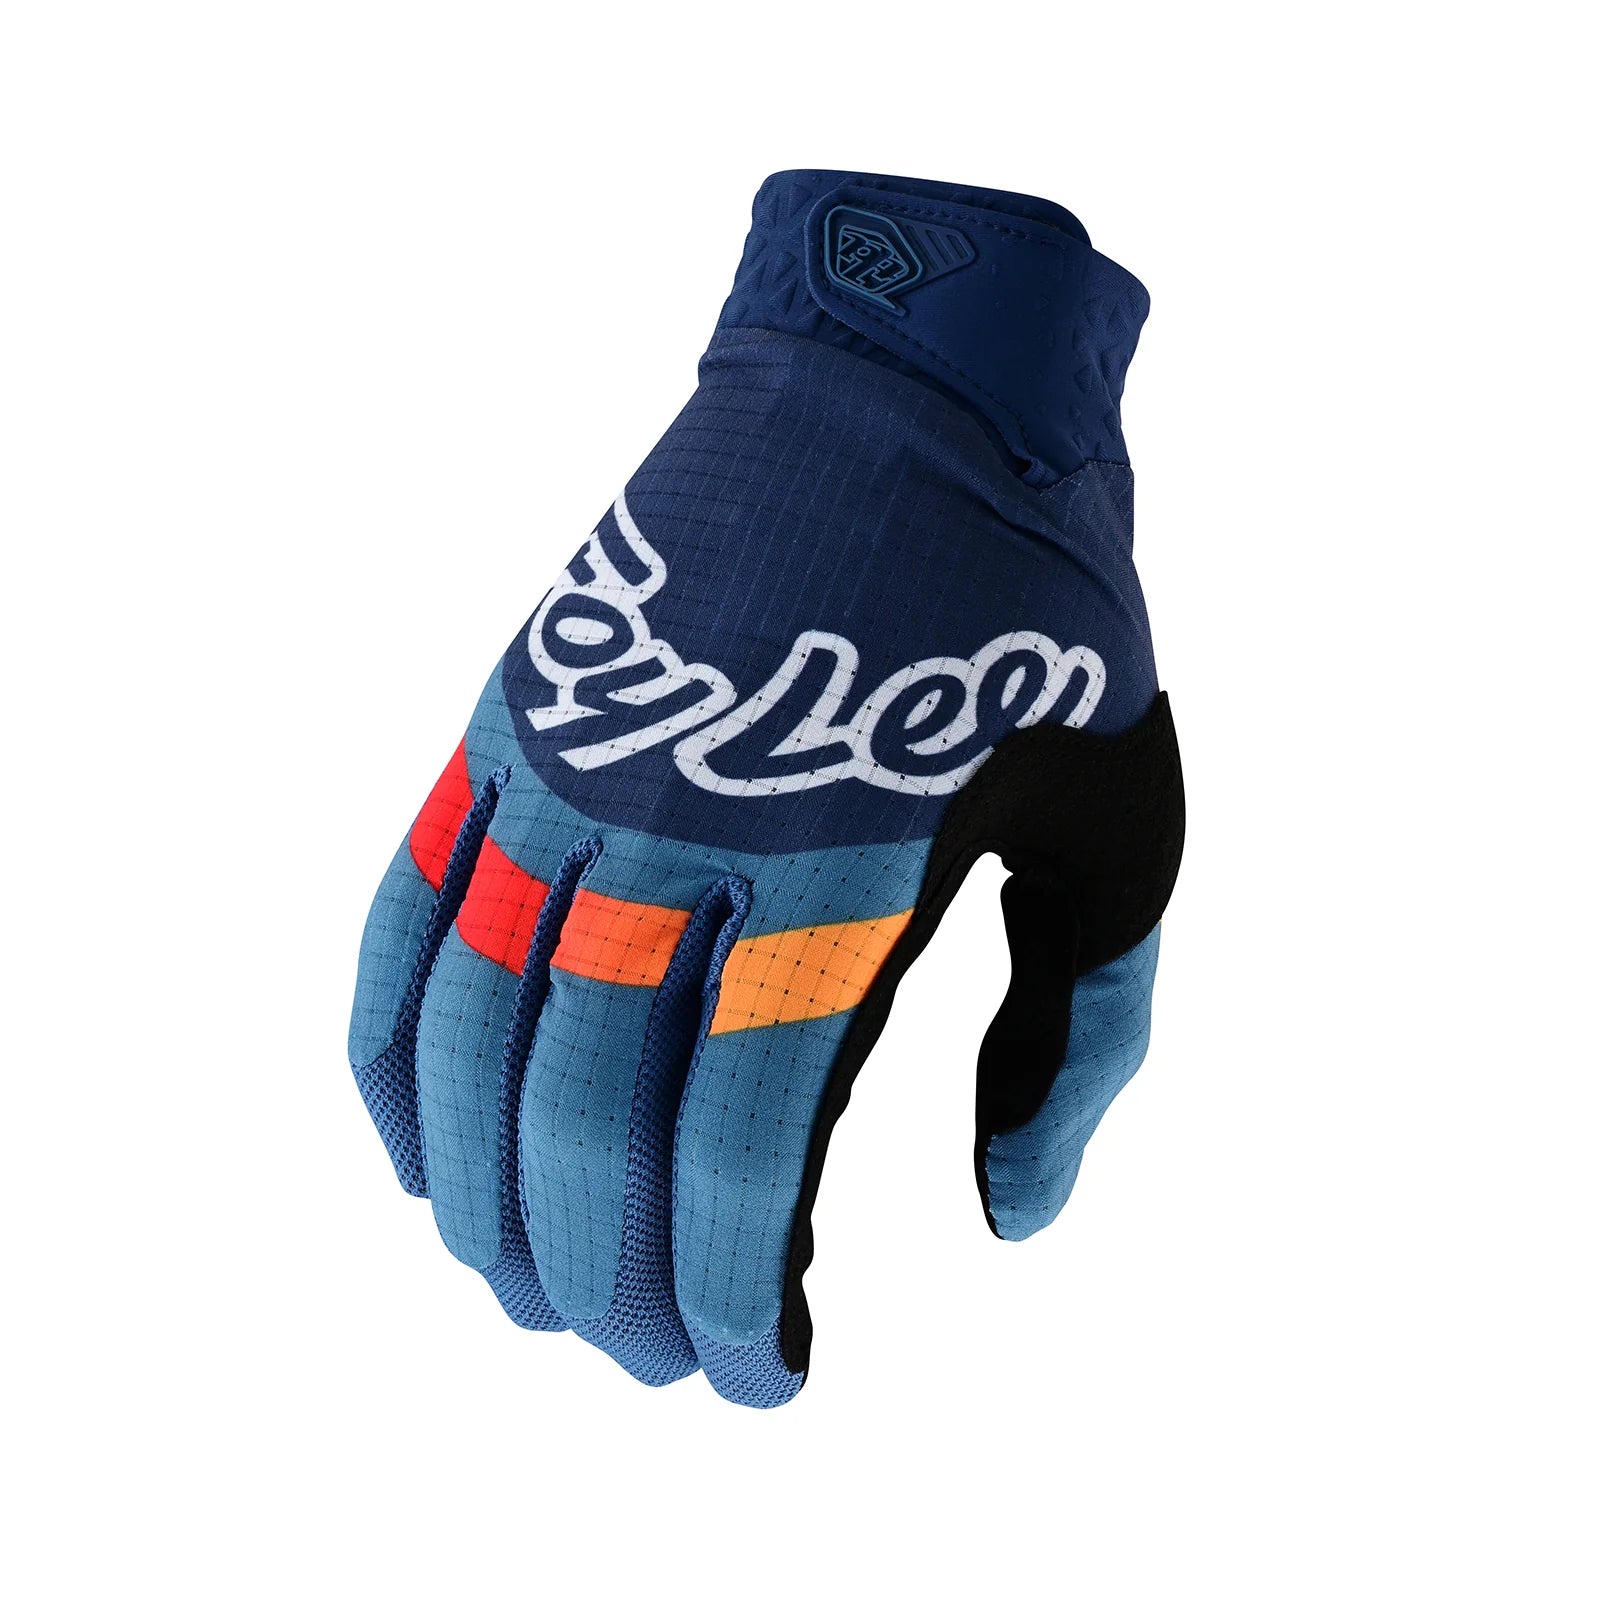 TLD Air Glove Pinned Blue, on a white background.